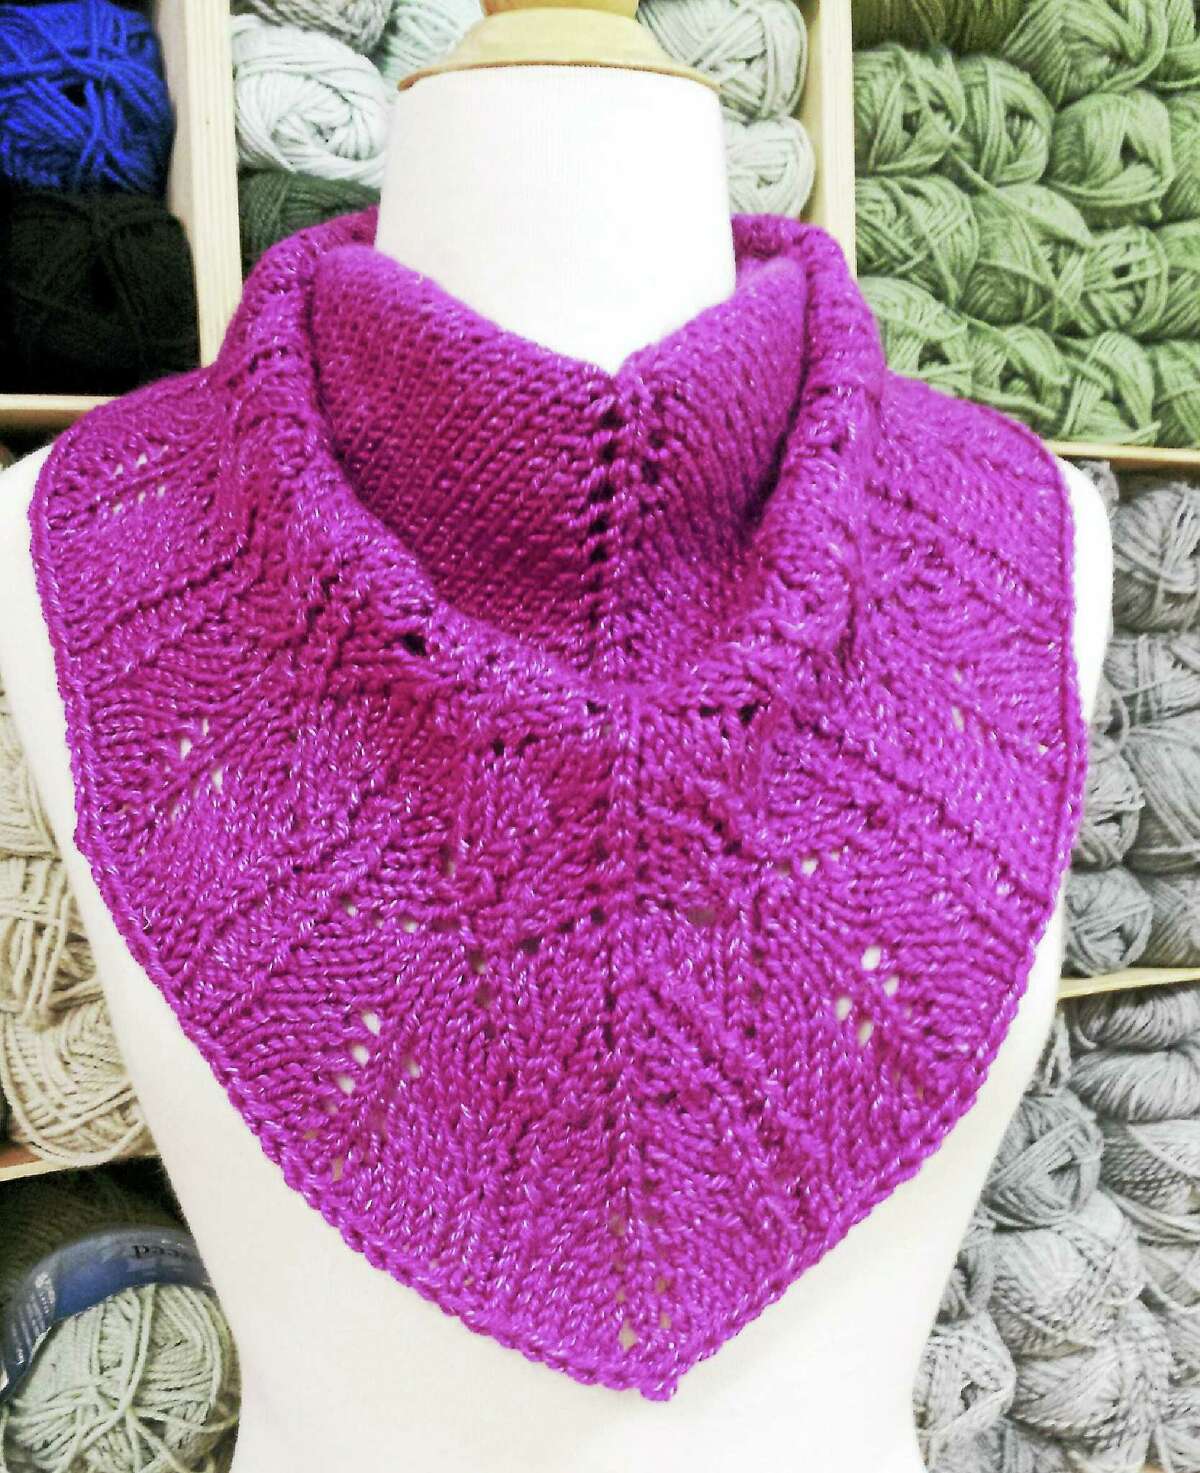 Contributed photoCraft a pretty cowl scarf for yourself or a friend.